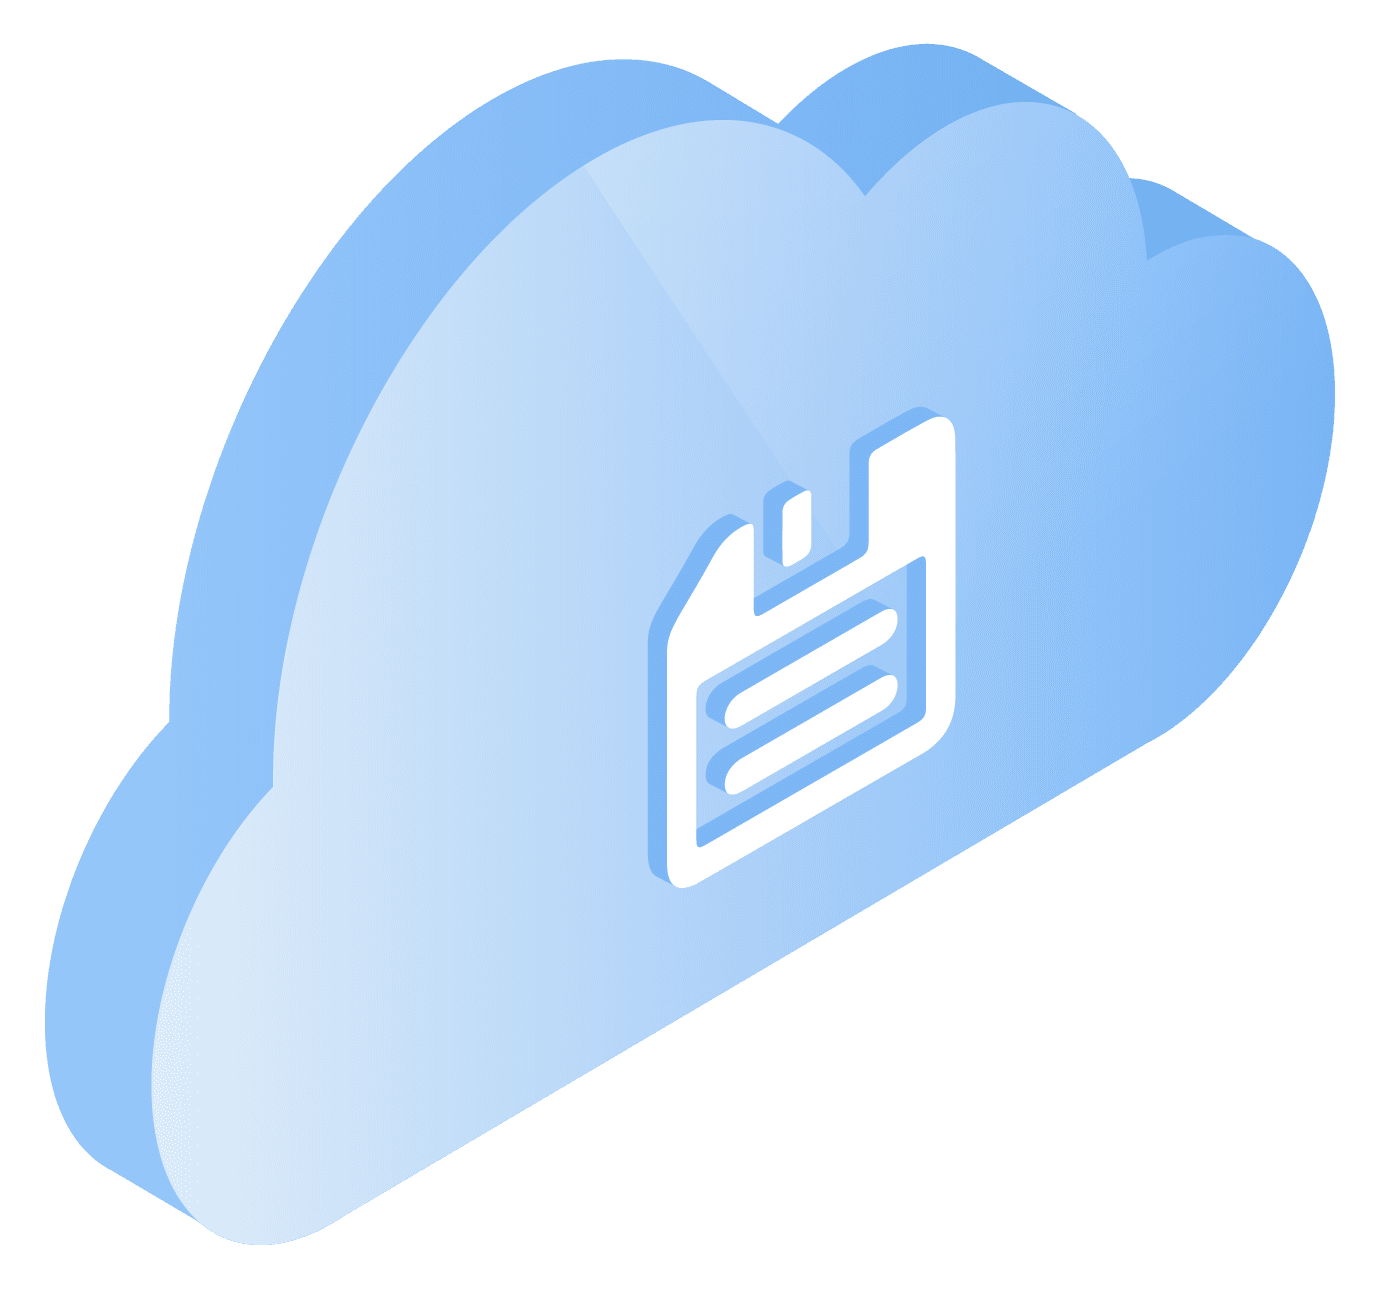 isometric icons depicting cloud computing services